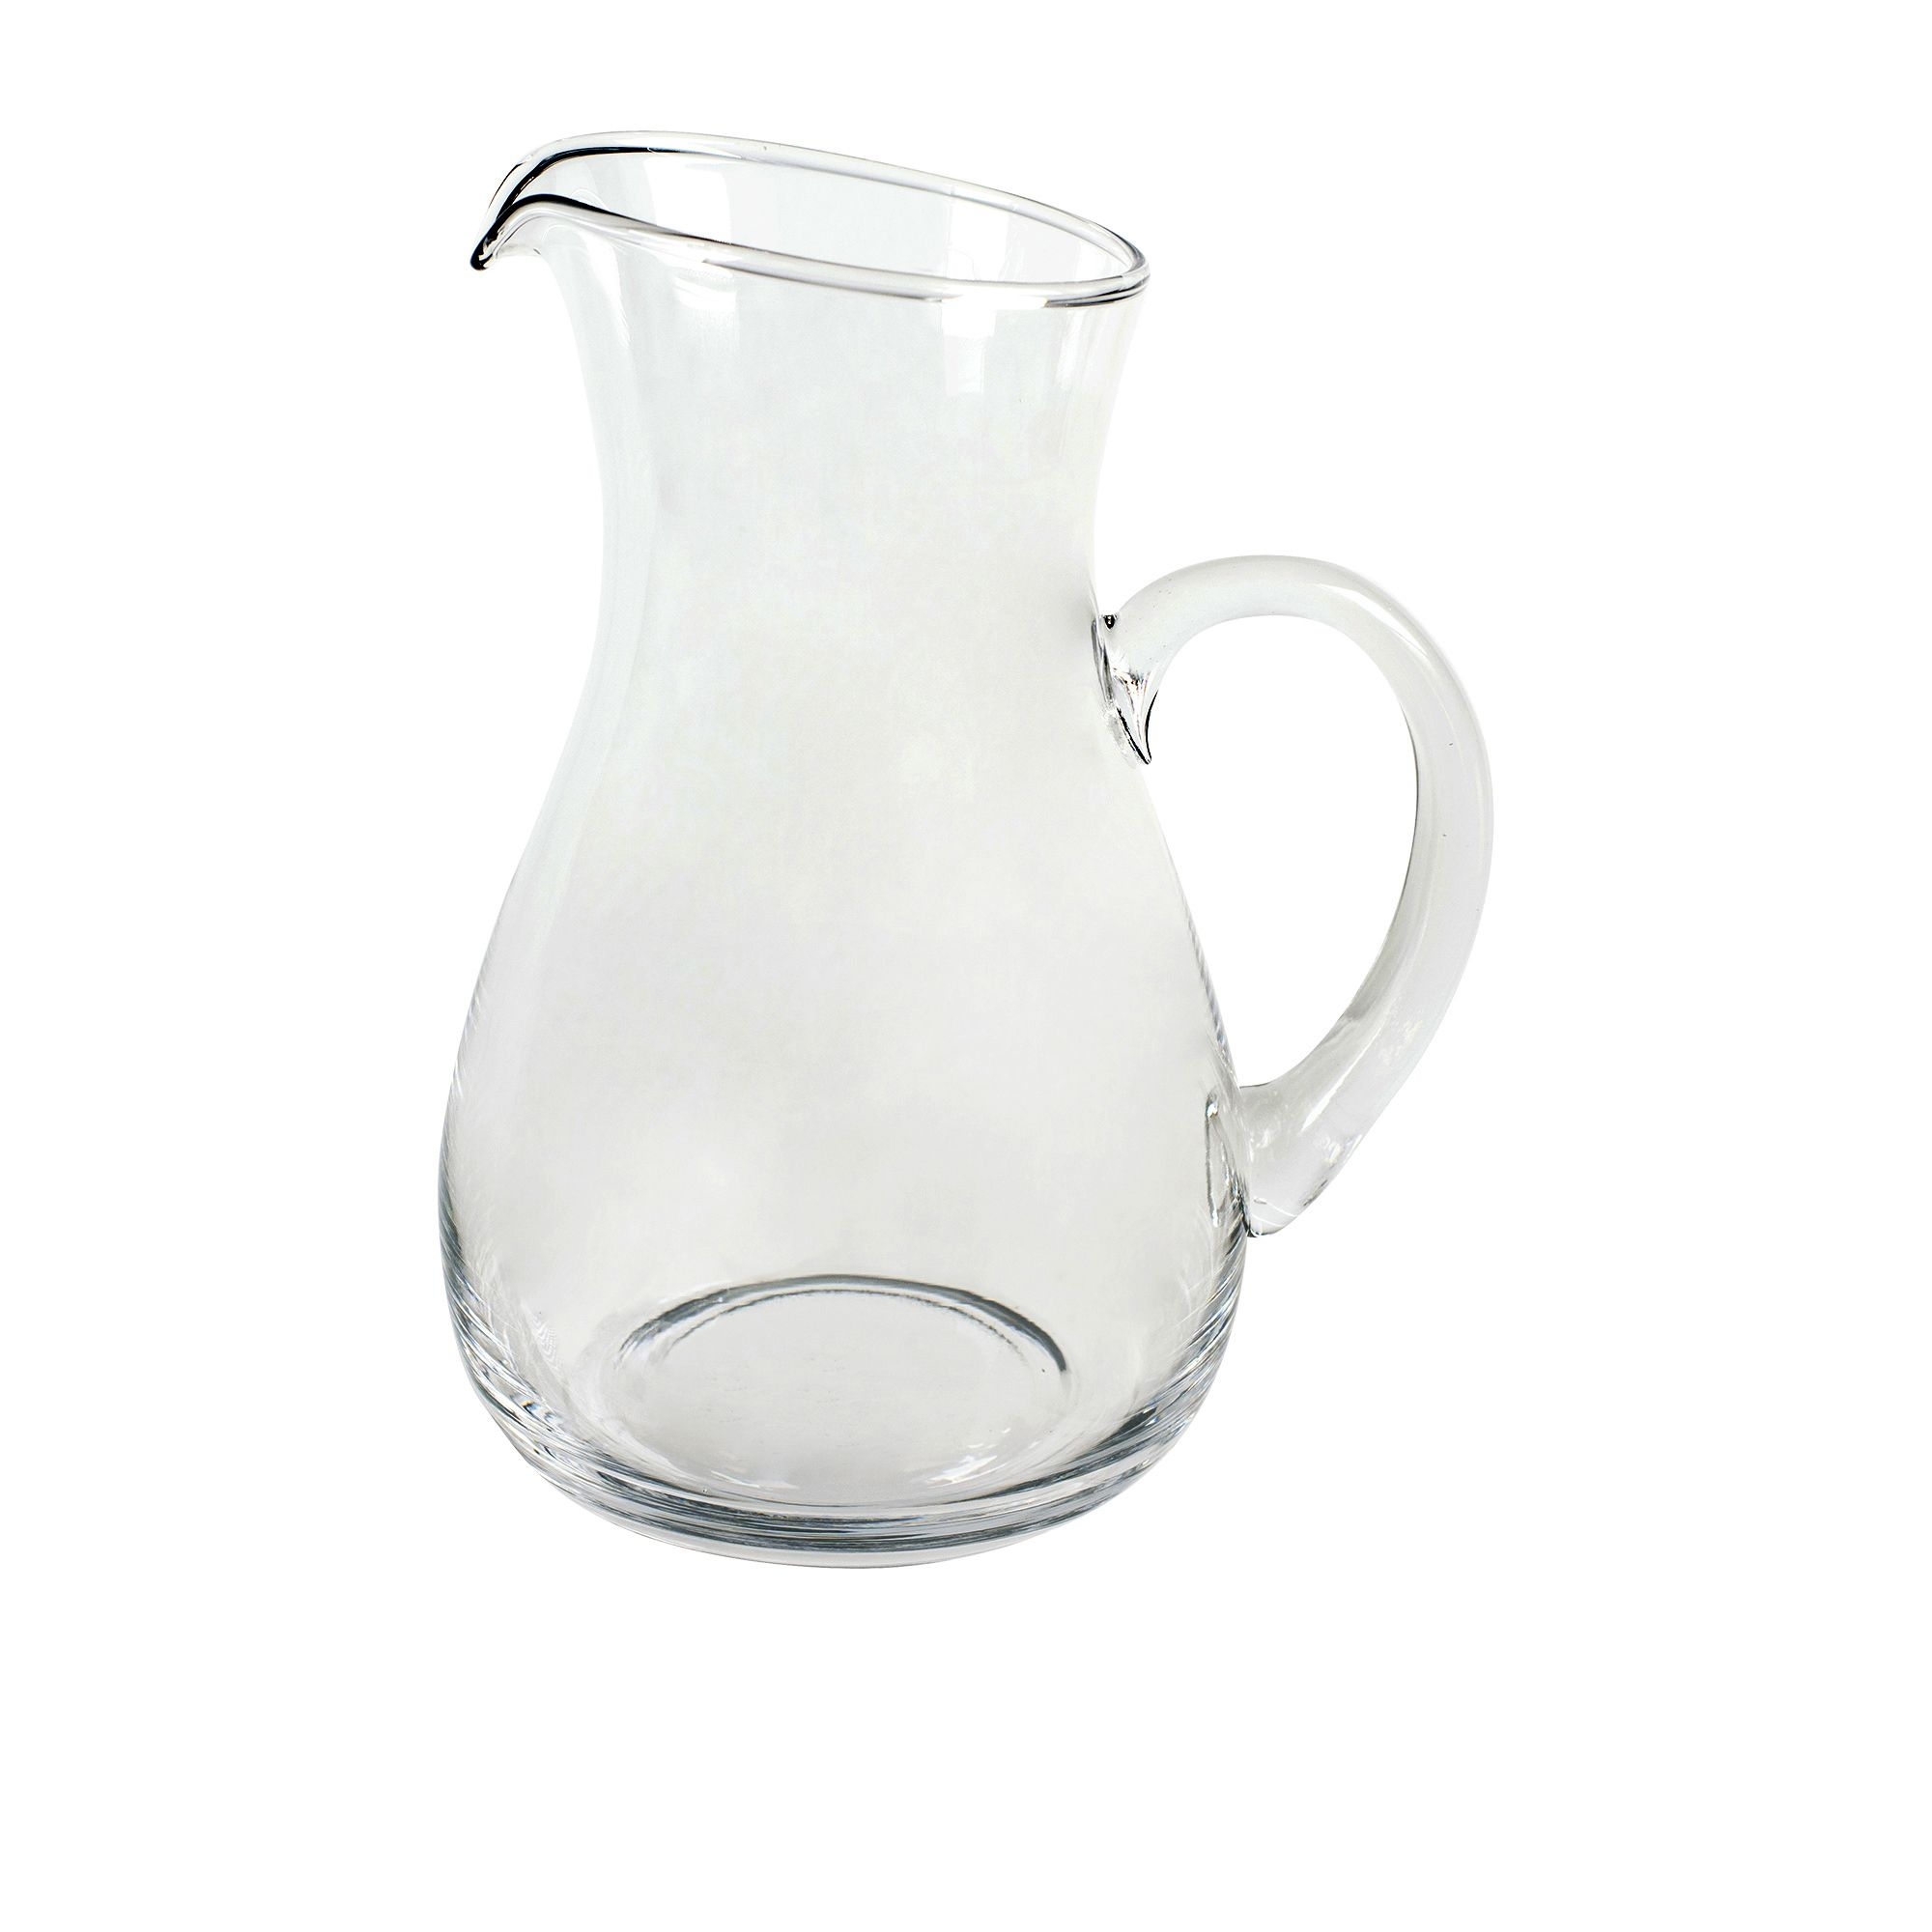 Wilkie Brothers Balmoral Water Pitcher 2.25L Image 1